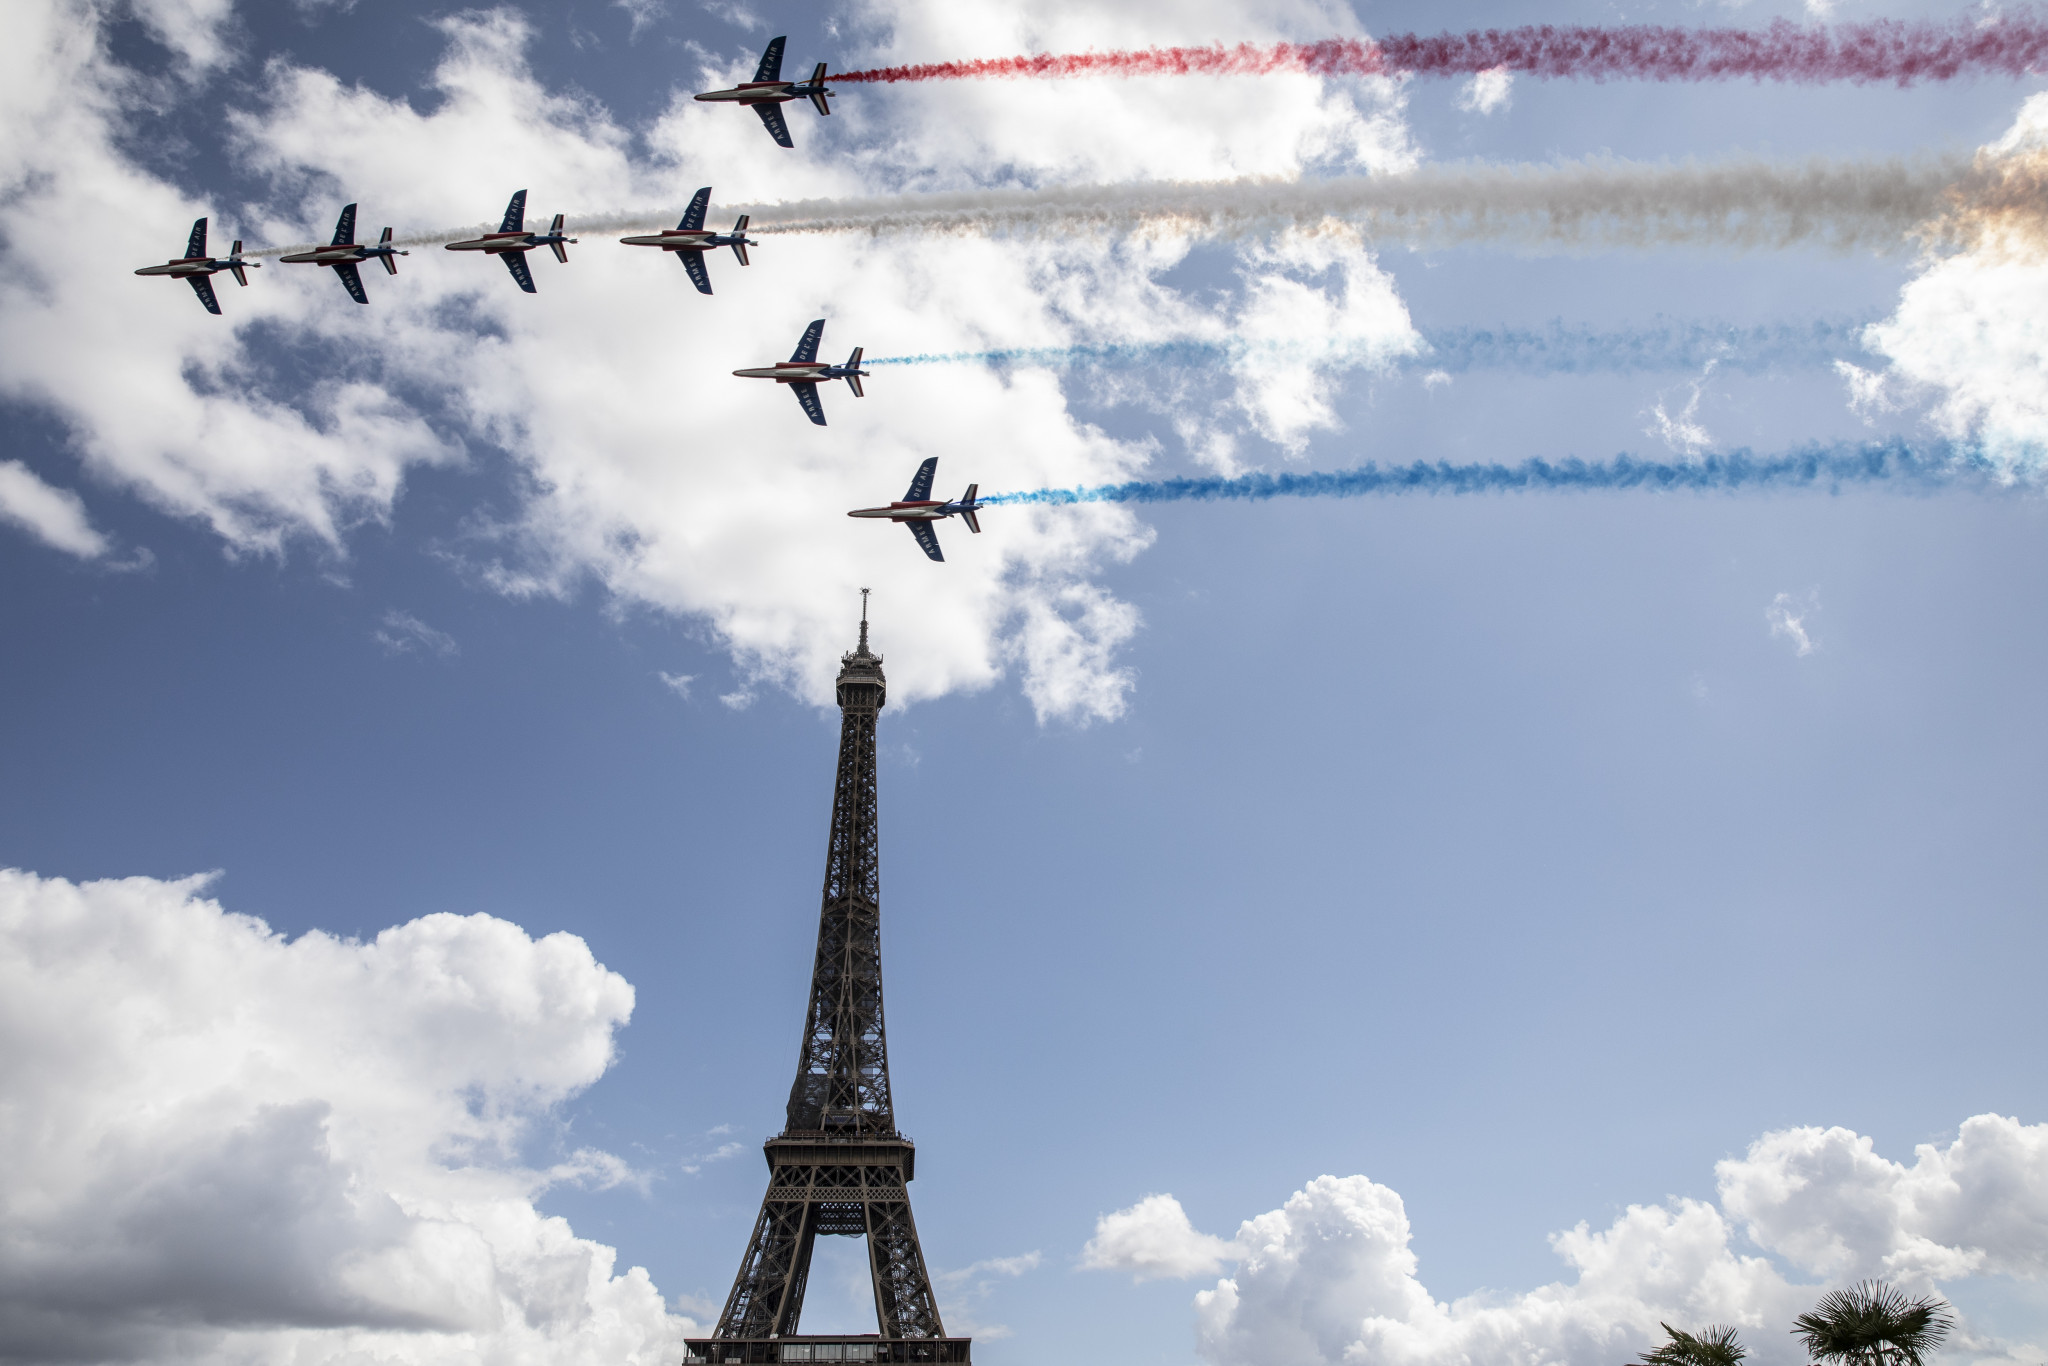 Hospitality tickets launched for Paris 2024 Olympics through new On Location platform